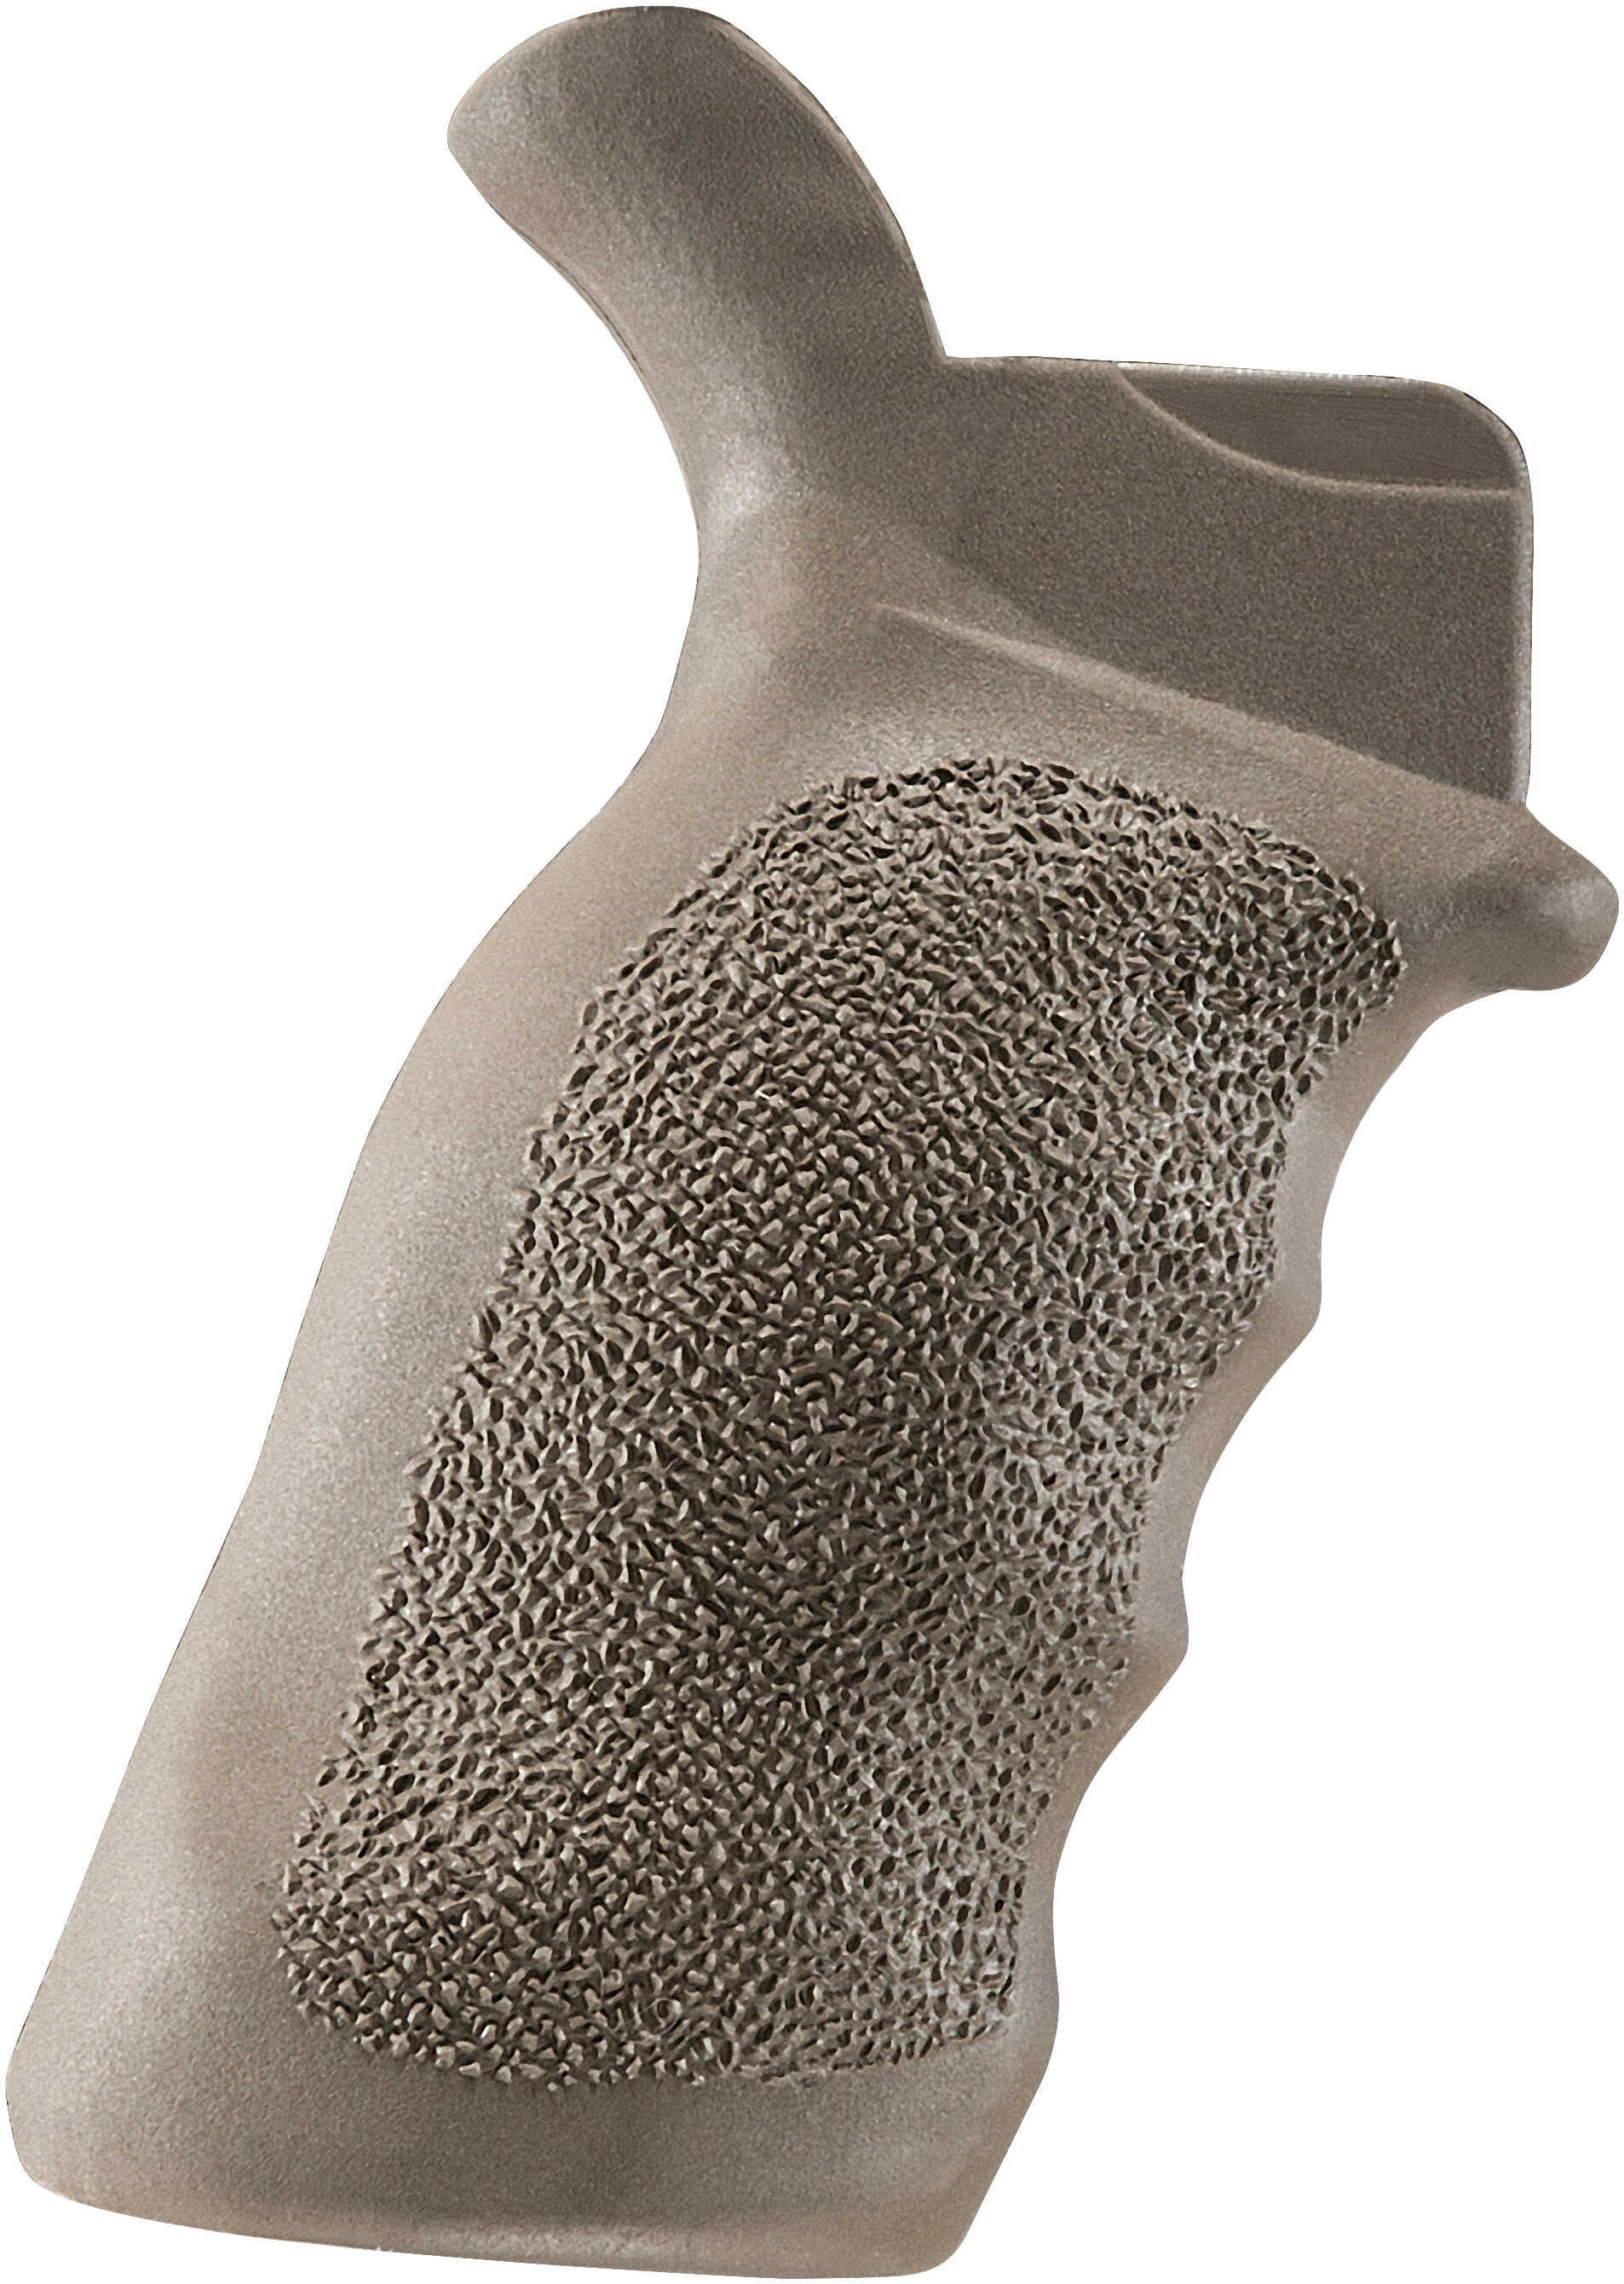 Ergo Falcon Industries Inc Olive Drab Green Tactical Grip For AR15/M16 Md: 4045OD